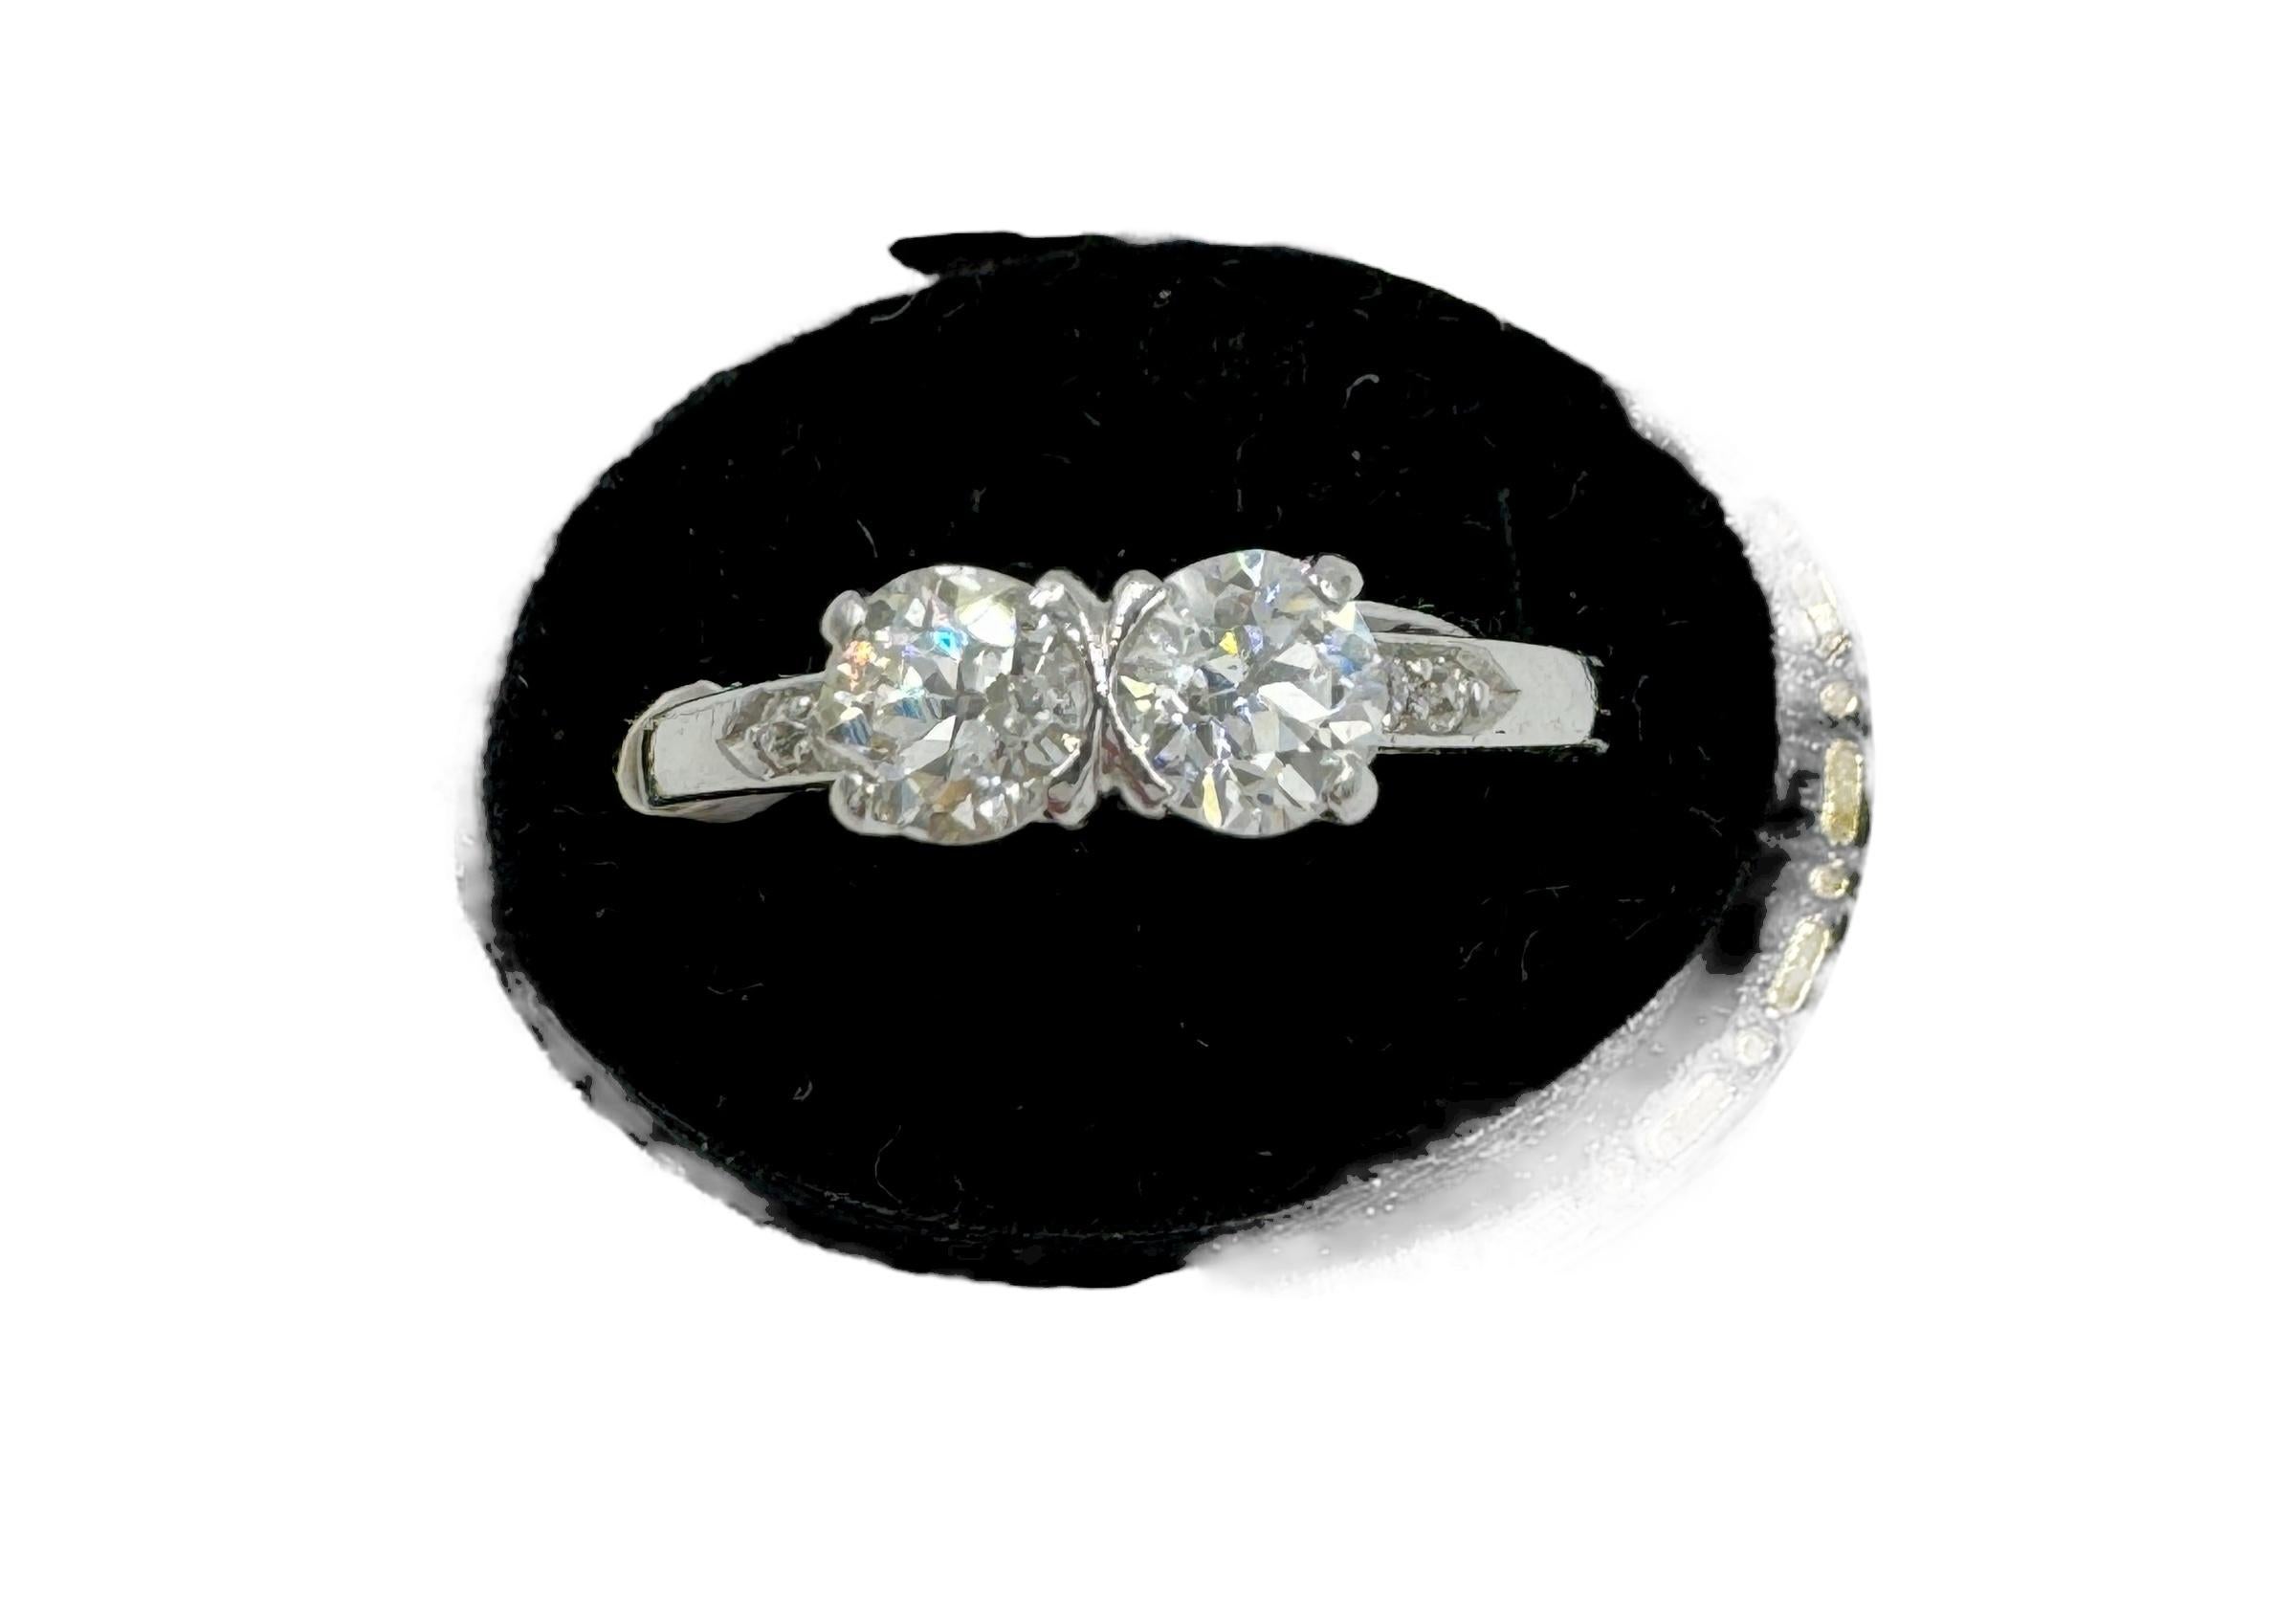 1930s Toi et Moi diamond two stone platinum ring.

The 1930s Toi Et Moi Diamond Two Stone Platinum Ring is a timeless piece of jewelry that embodies the elegance and sophistication of the Art Deco era. This stunning ring features two exquisite